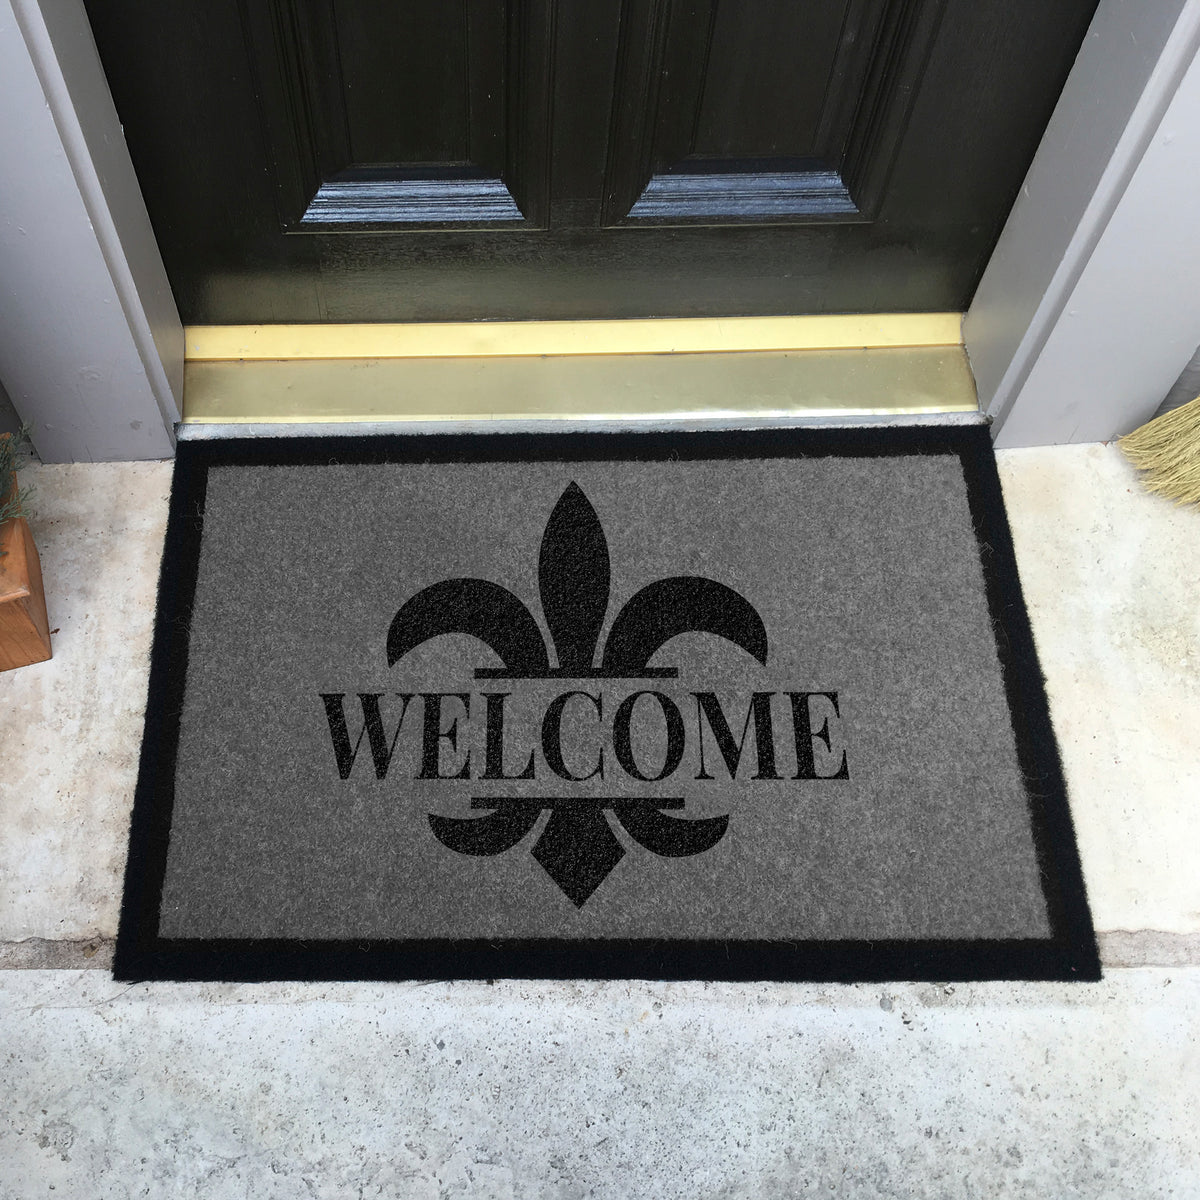 Infinity Custom Mats™ All-Weather Personalized Door Mat - STYLE: WALLACE  COLOR: GREY / BLACK - rugsthatfit.com